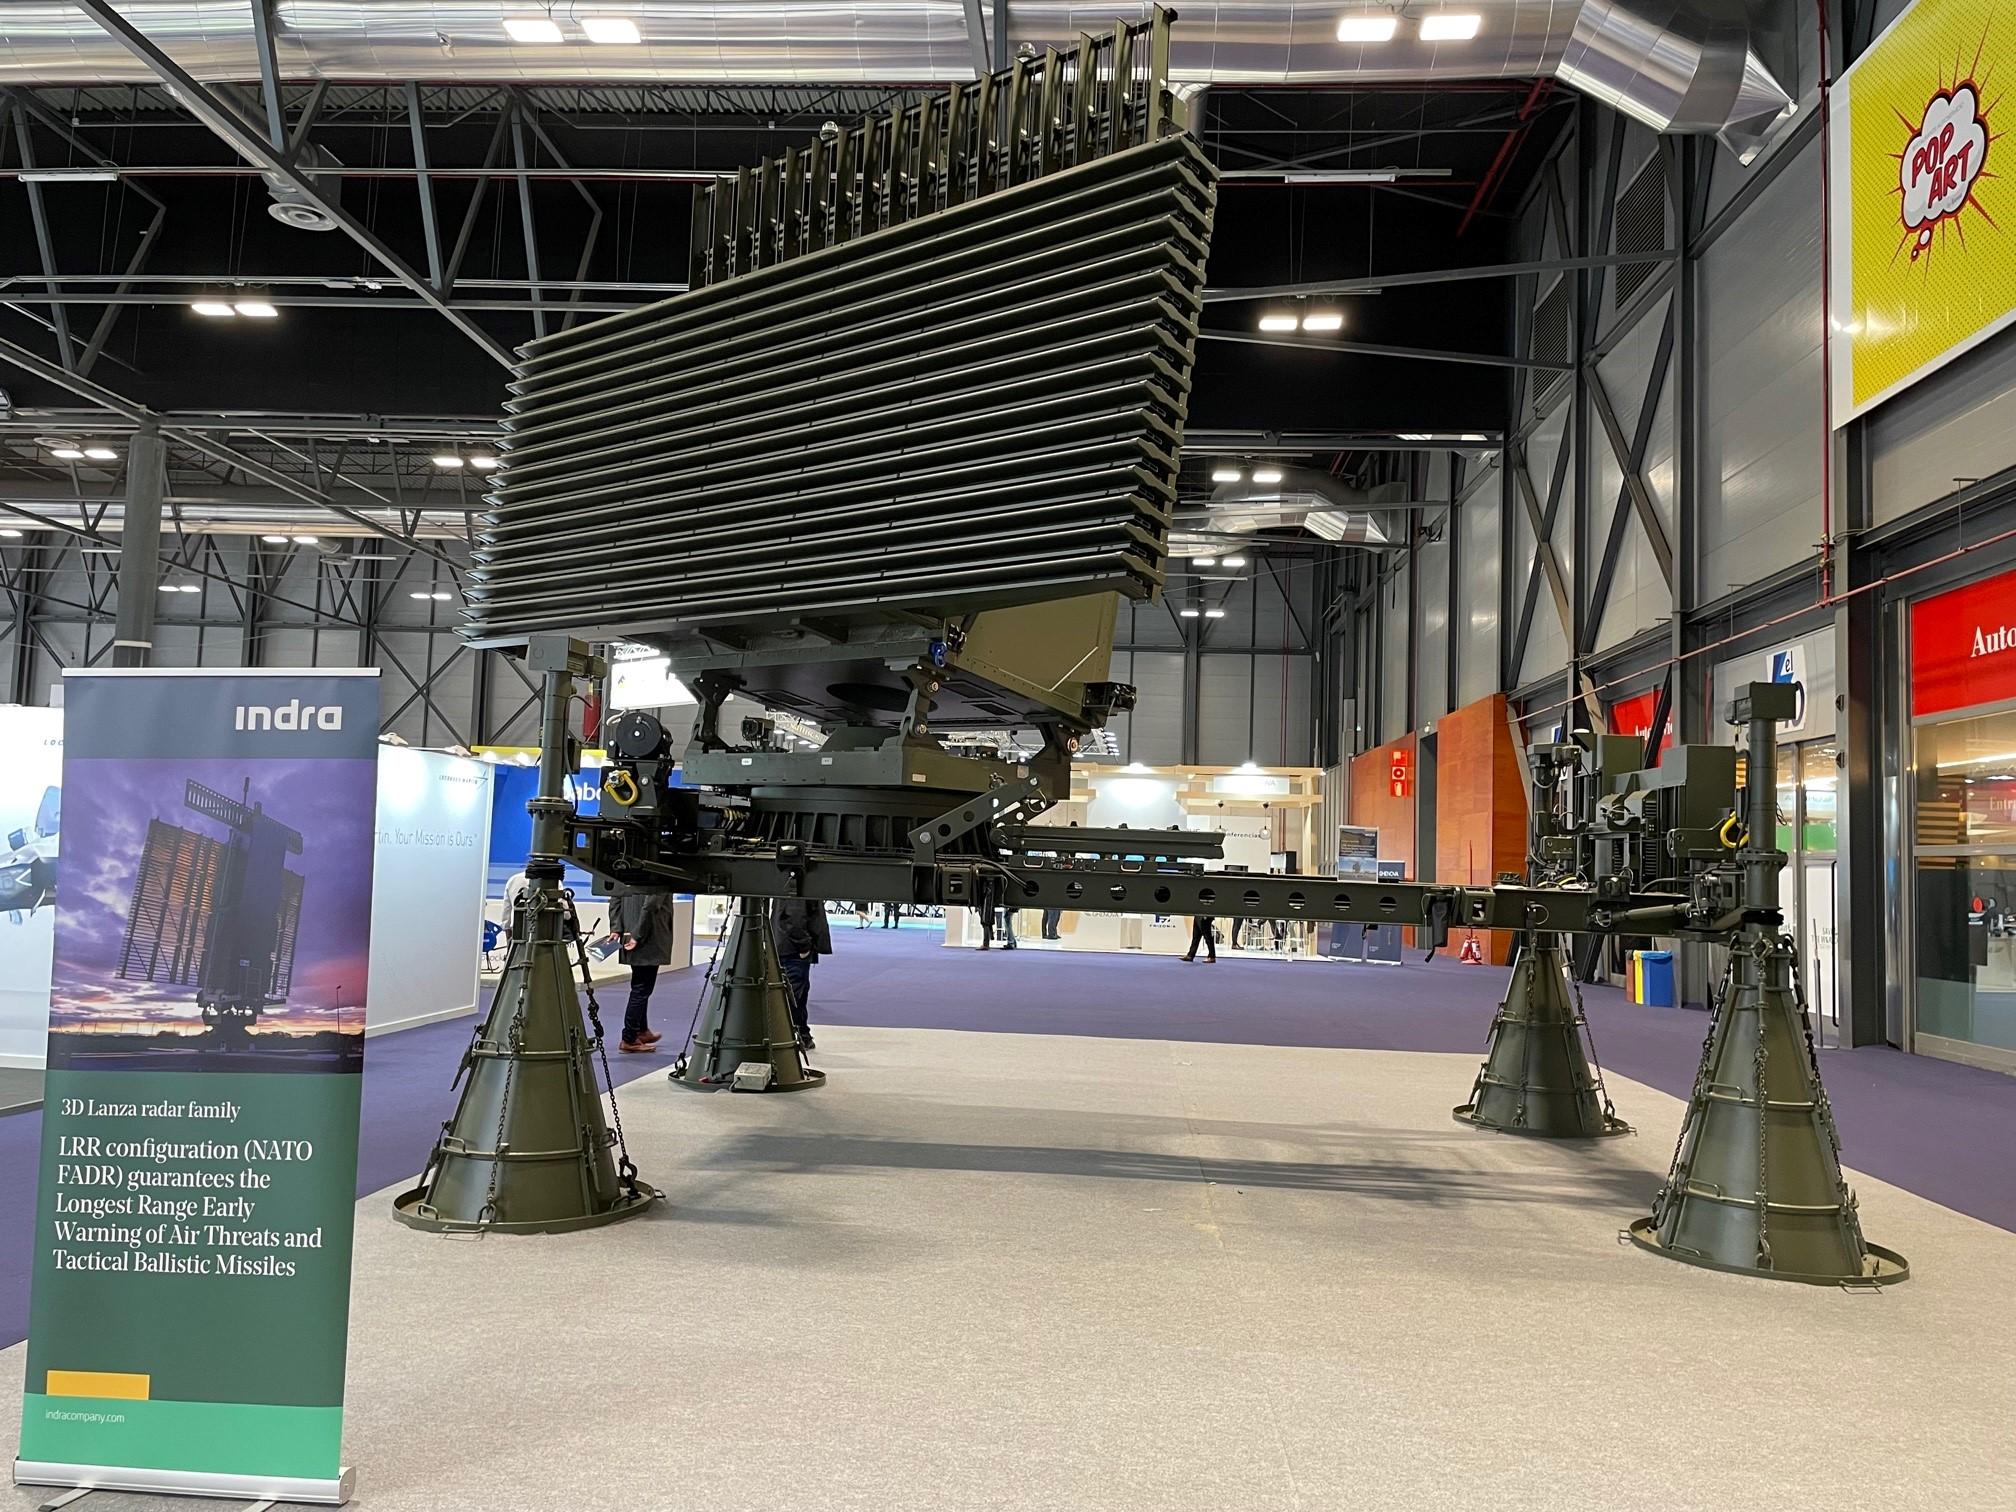 Indra's Lanza 3D Deployable Air Defence Radar (DADR) Passes NATO’s Missile Detection and Tracking Tests